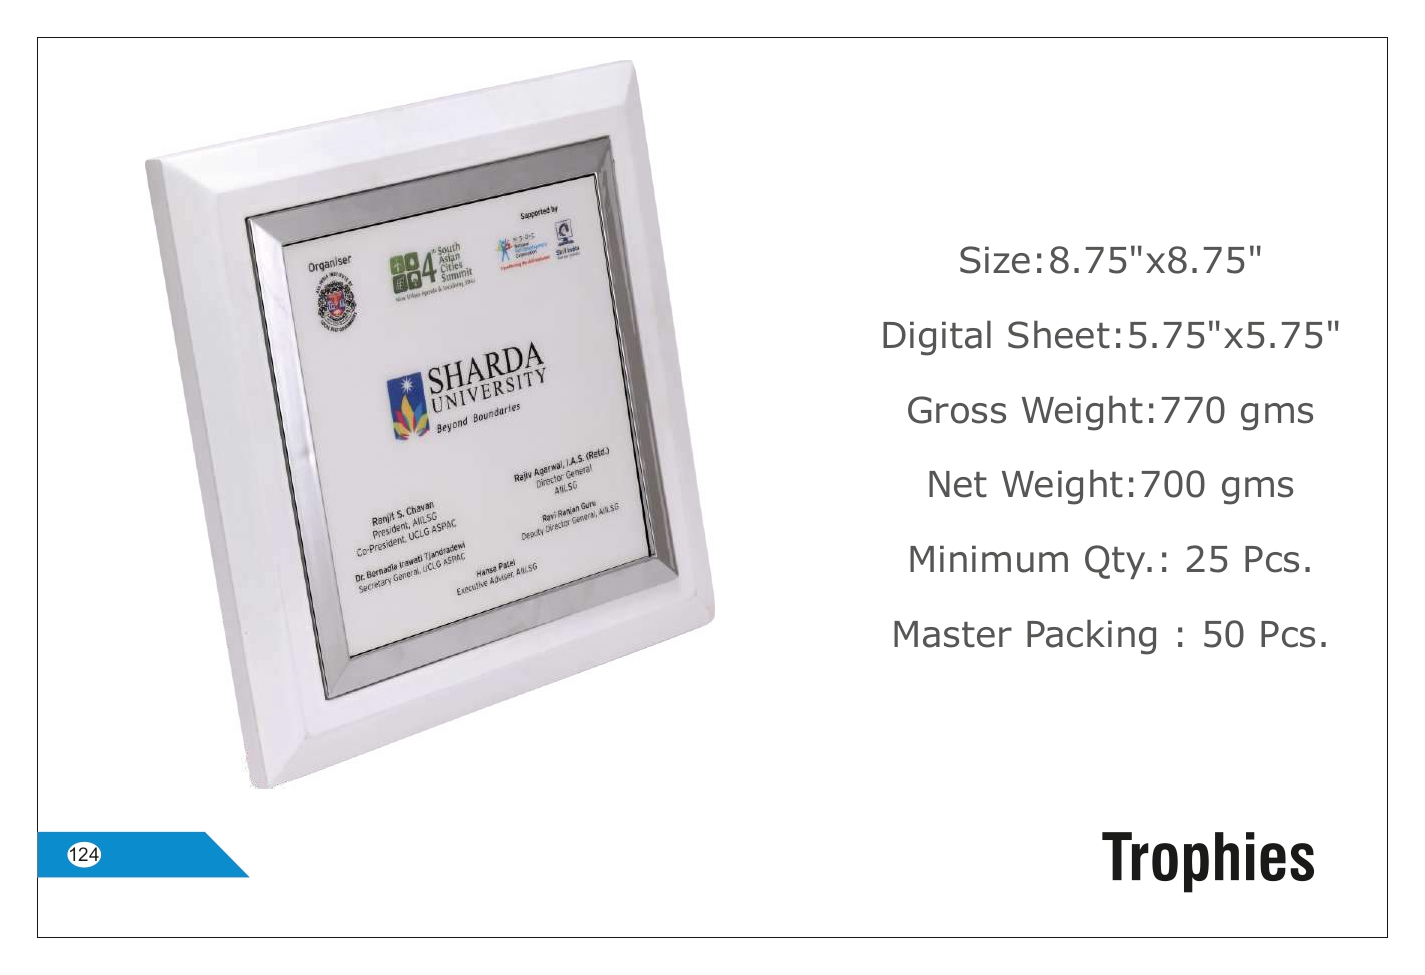 Square Recognition Trophy with Digital Sheet